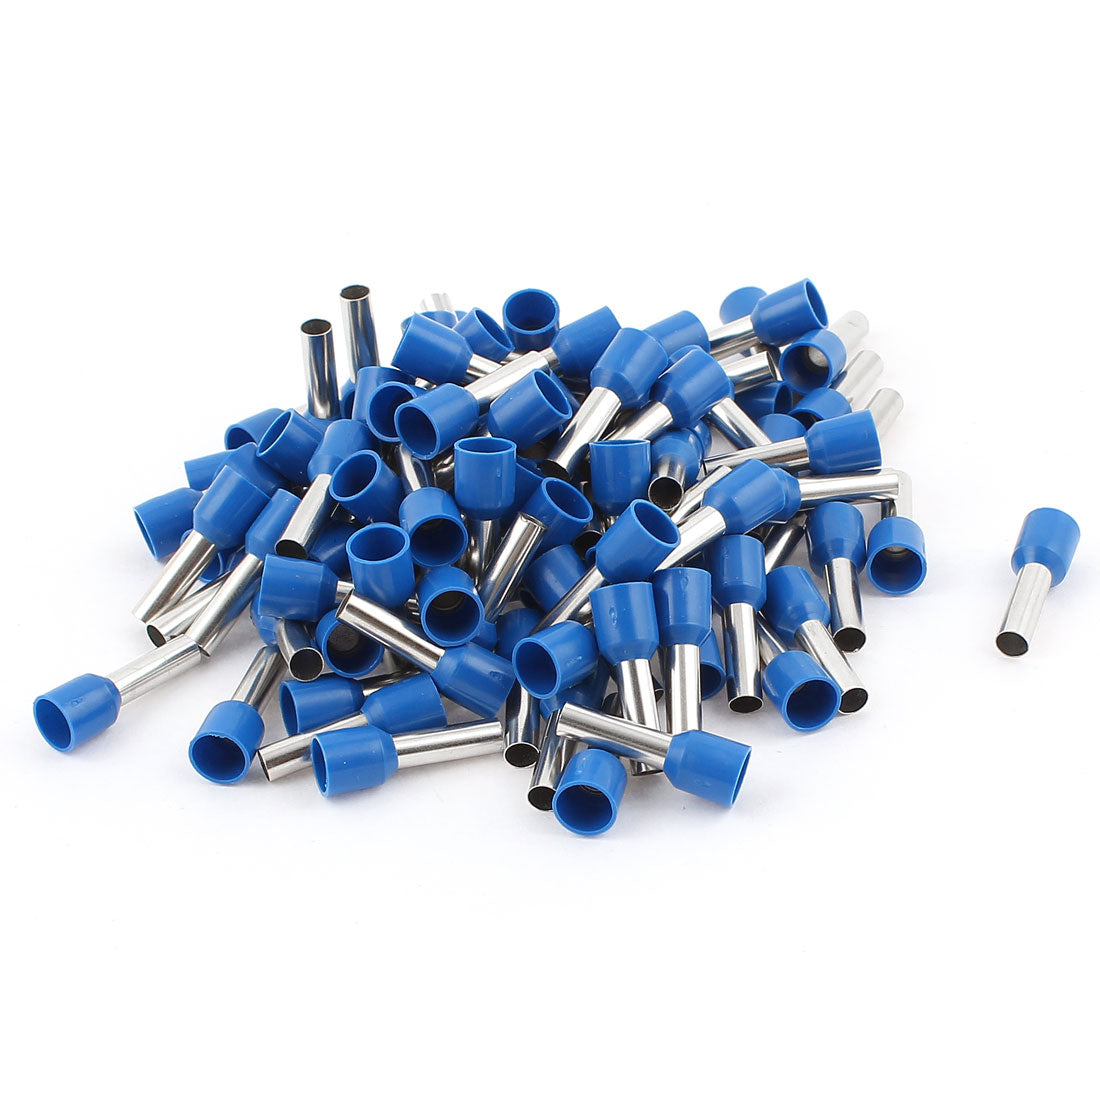 uxcell Uxcell 100 Pcs 6mm2 Crimp Cord Wire End Terminal Insulated Bootlace Ferrule Connector Blue